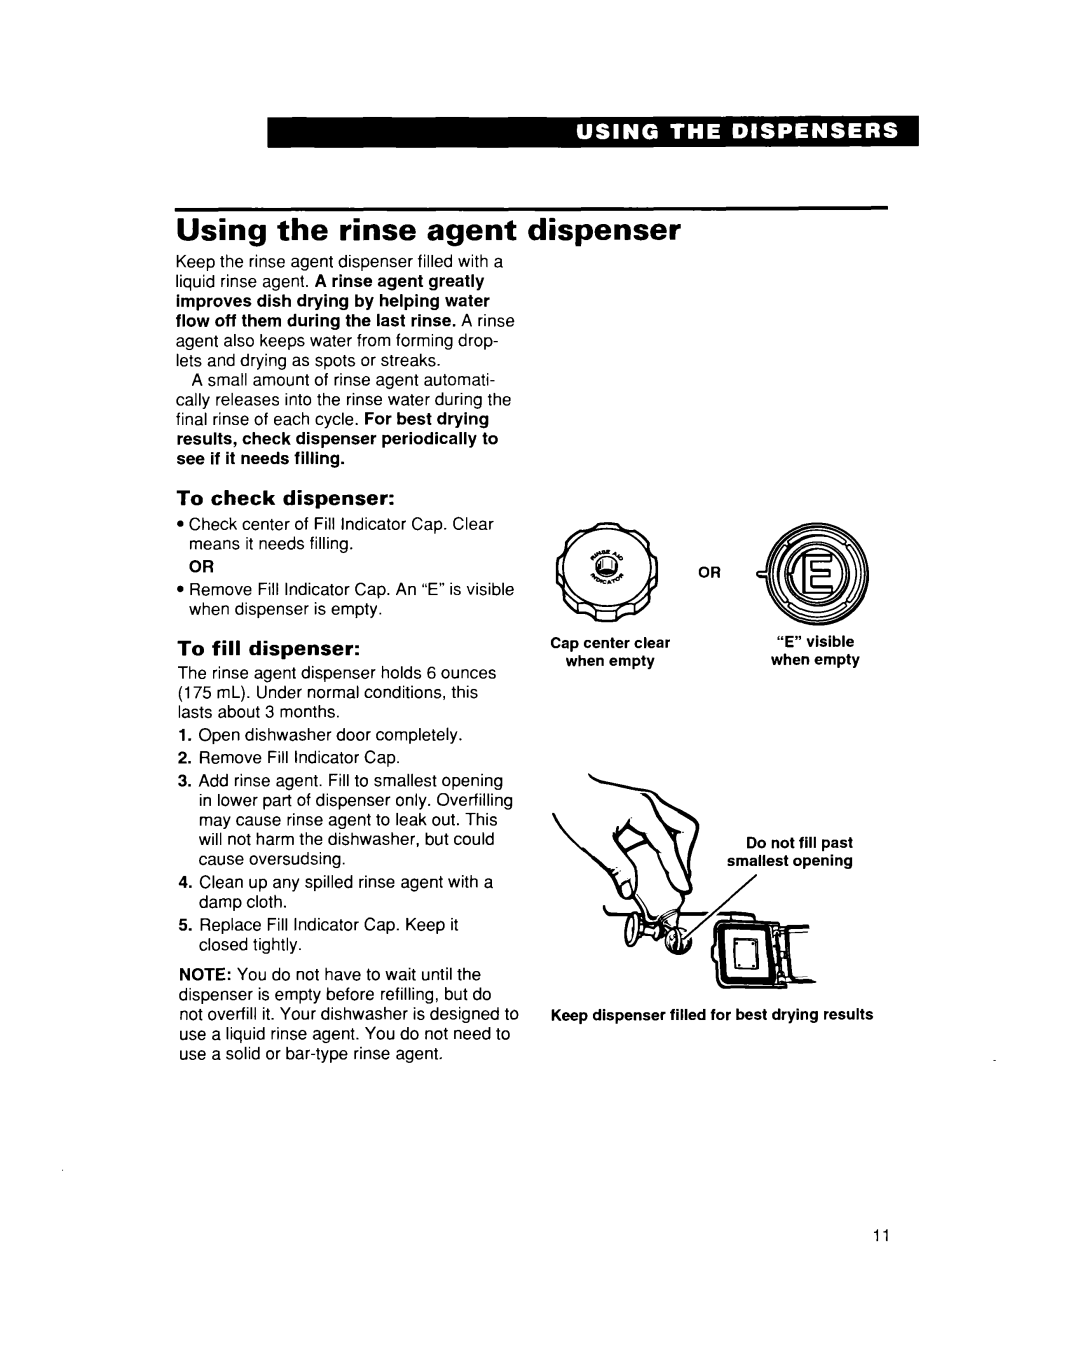 Whirlpool DU935QWD, DU930QWD warranty Using the rinse agent dispenser, To check dispenser, To fill dispenser 